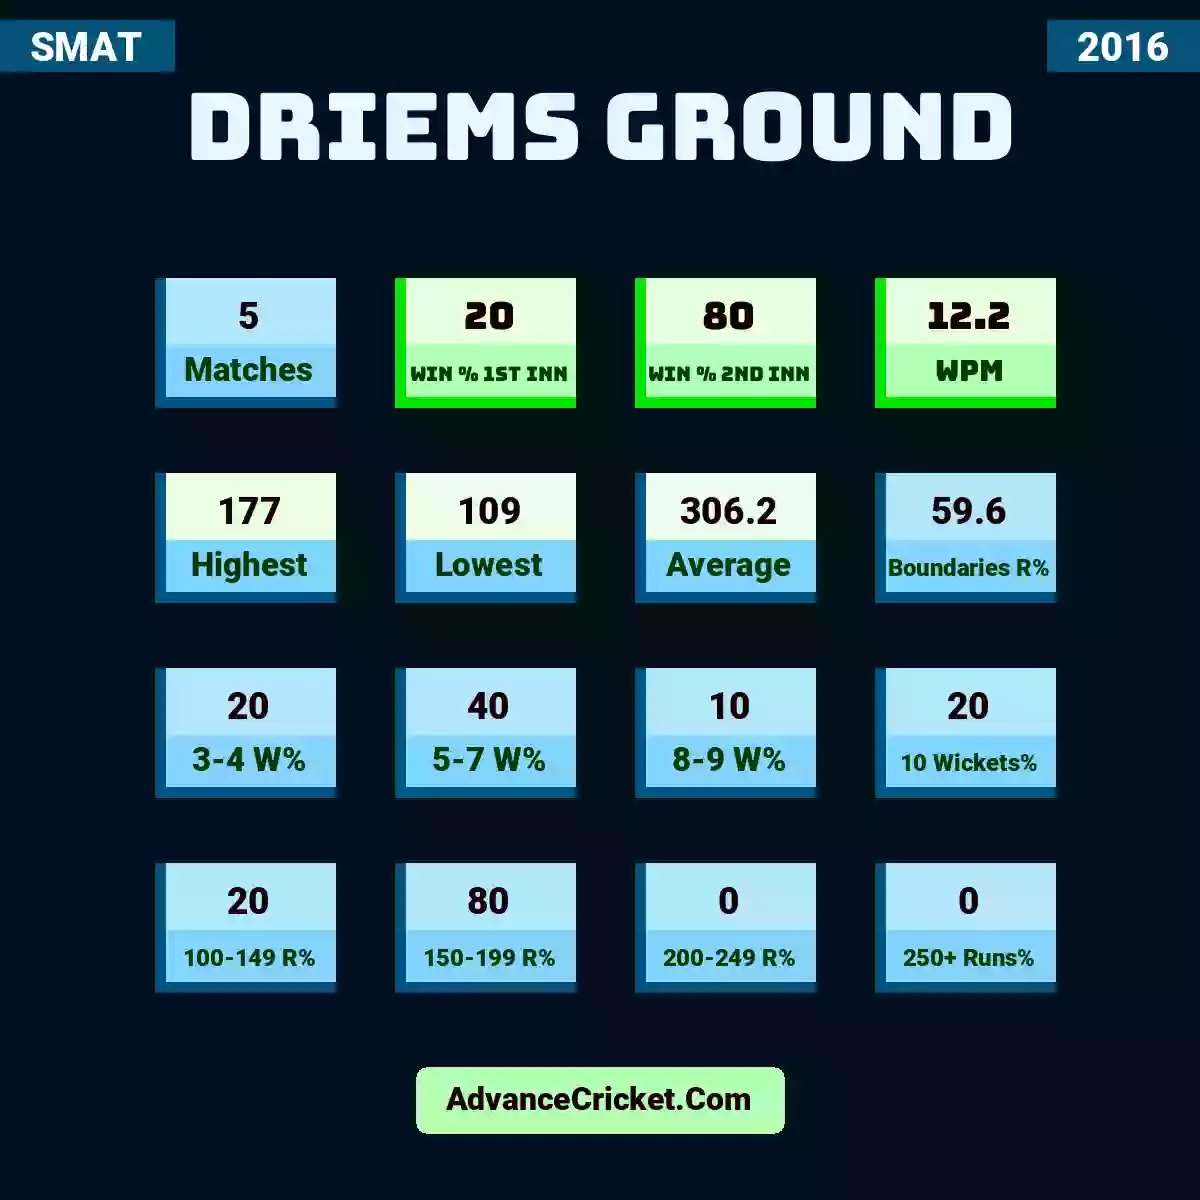 Image showing DRIEMS Ground with Matches: 5, Win % 1st Inn: 20, Win % 2nd Inn: 80, WPM: 12.2, Highest: 177, Lowest: 109, Average: 306.2, Boundaries R%: 59.6, 3-4 W%: 20, 5-7 W%: 40, 8-9 W%: 10, 10 Wickets%: 20, 100-149 R%: 20, 150-199 R%: 80, 200-249 R%: 0, 250+ Runs%: 0.